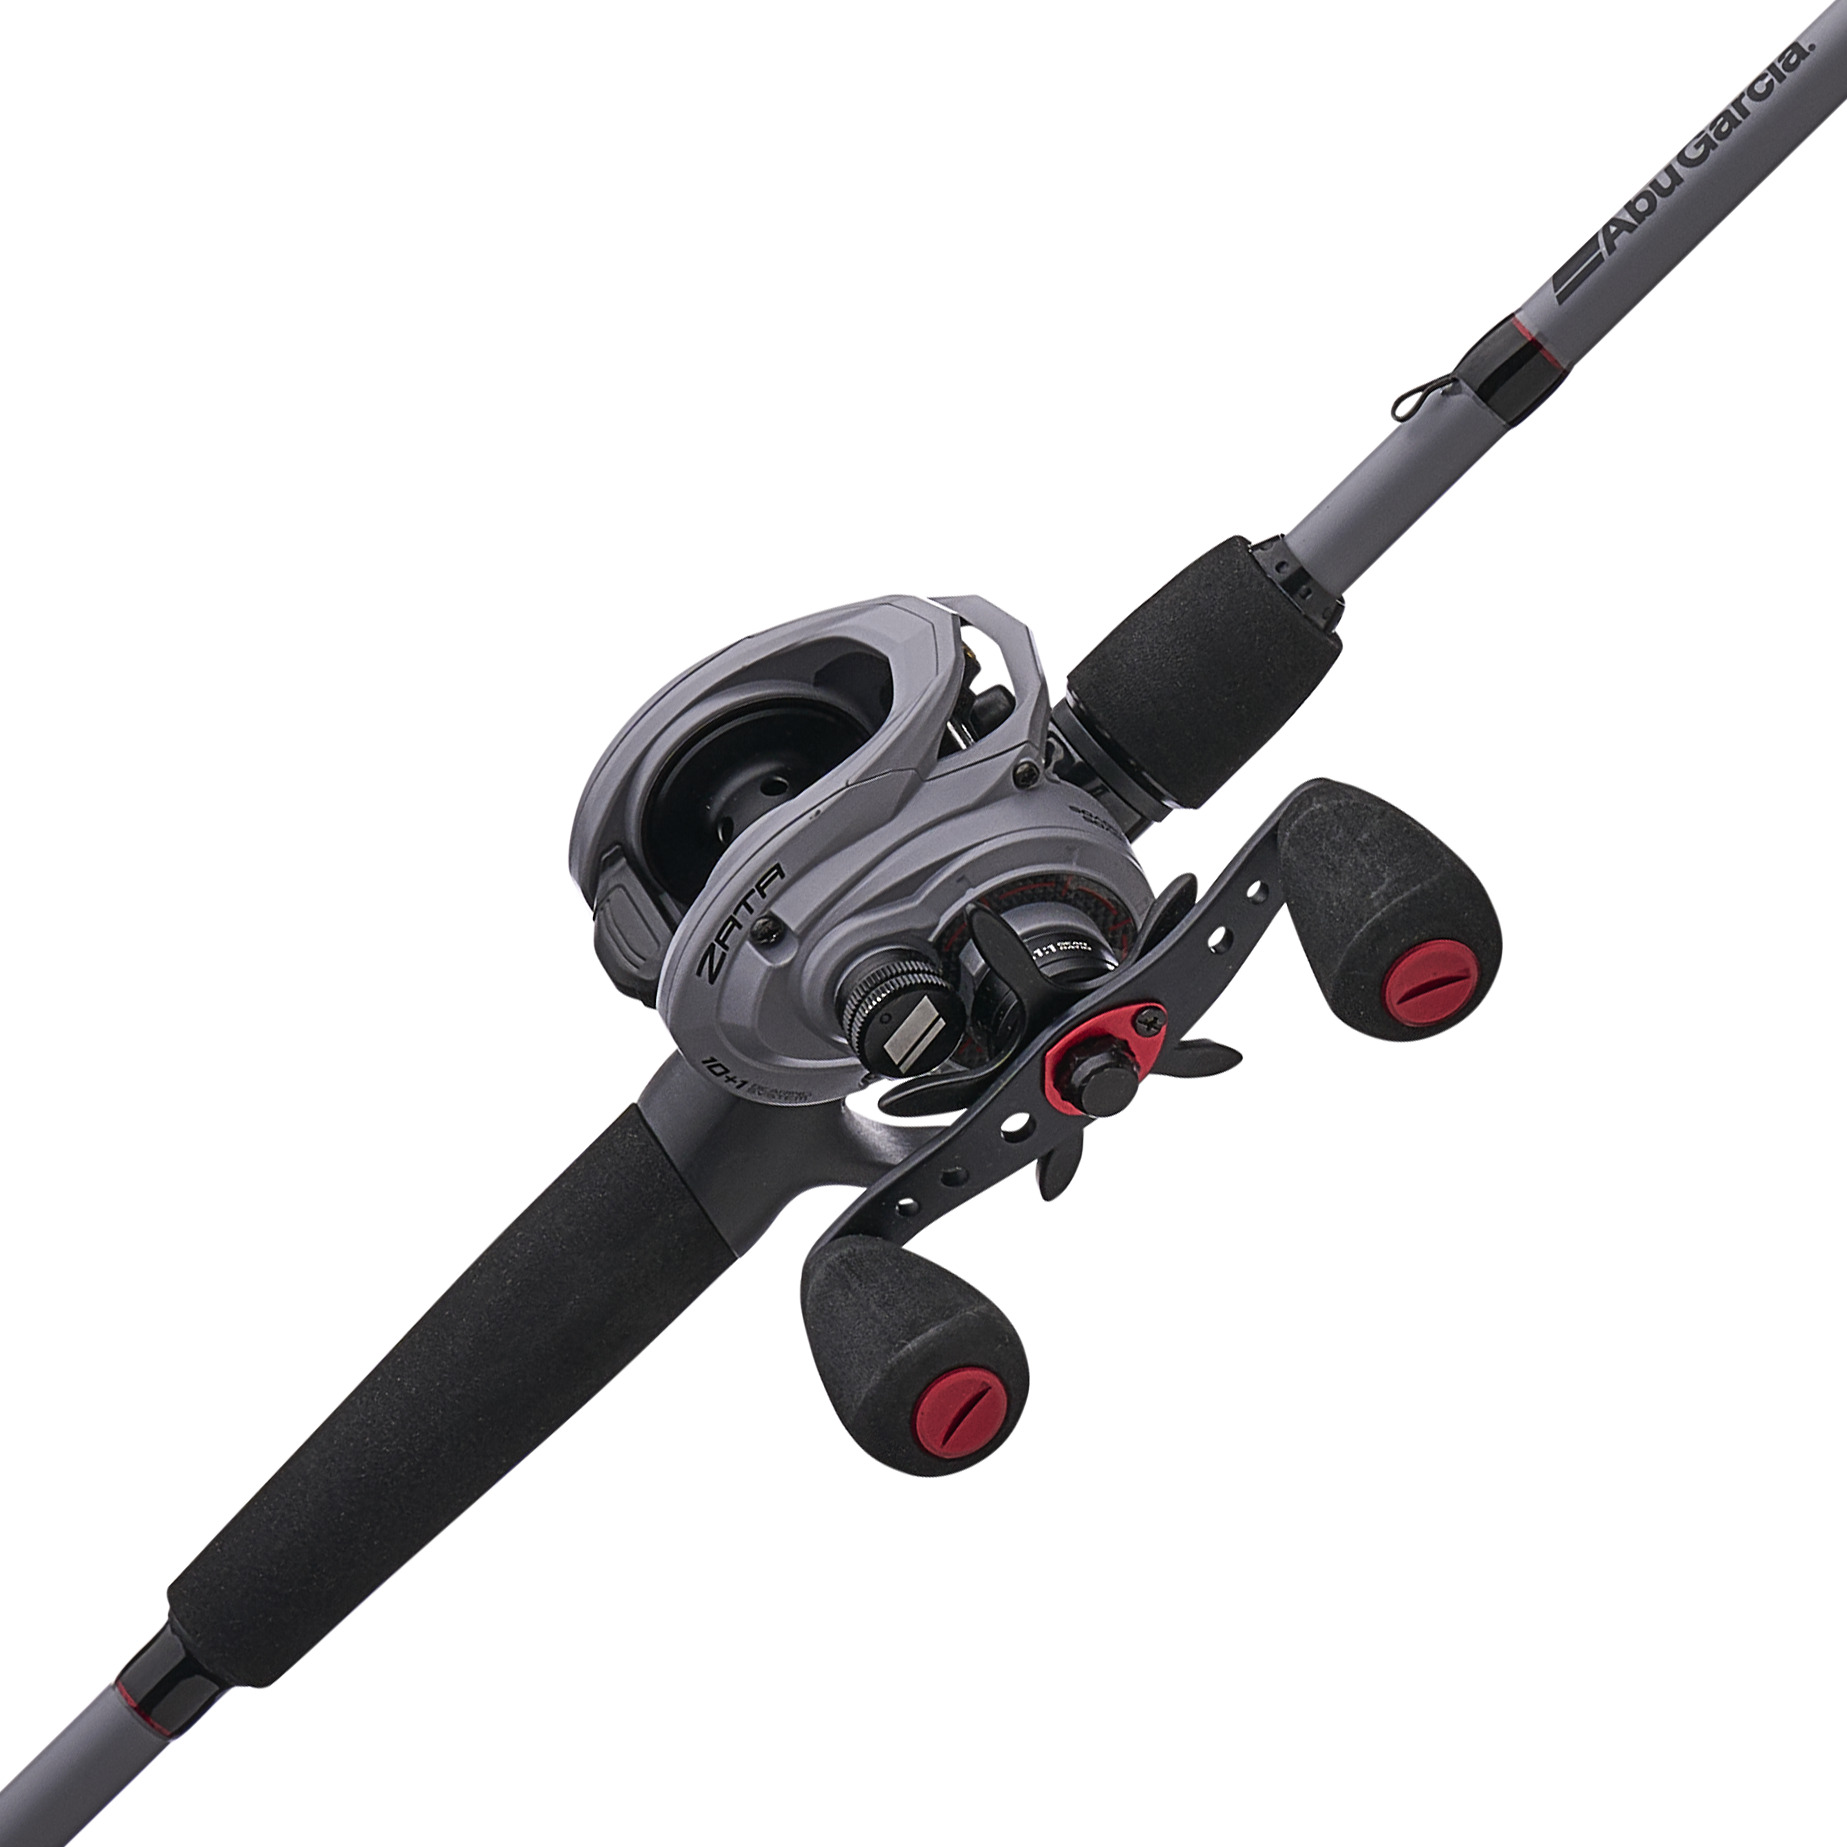 Abu Garcia Zata Reels and Combos Return With All New Look and Upgraded  Performance – Anglers Channel